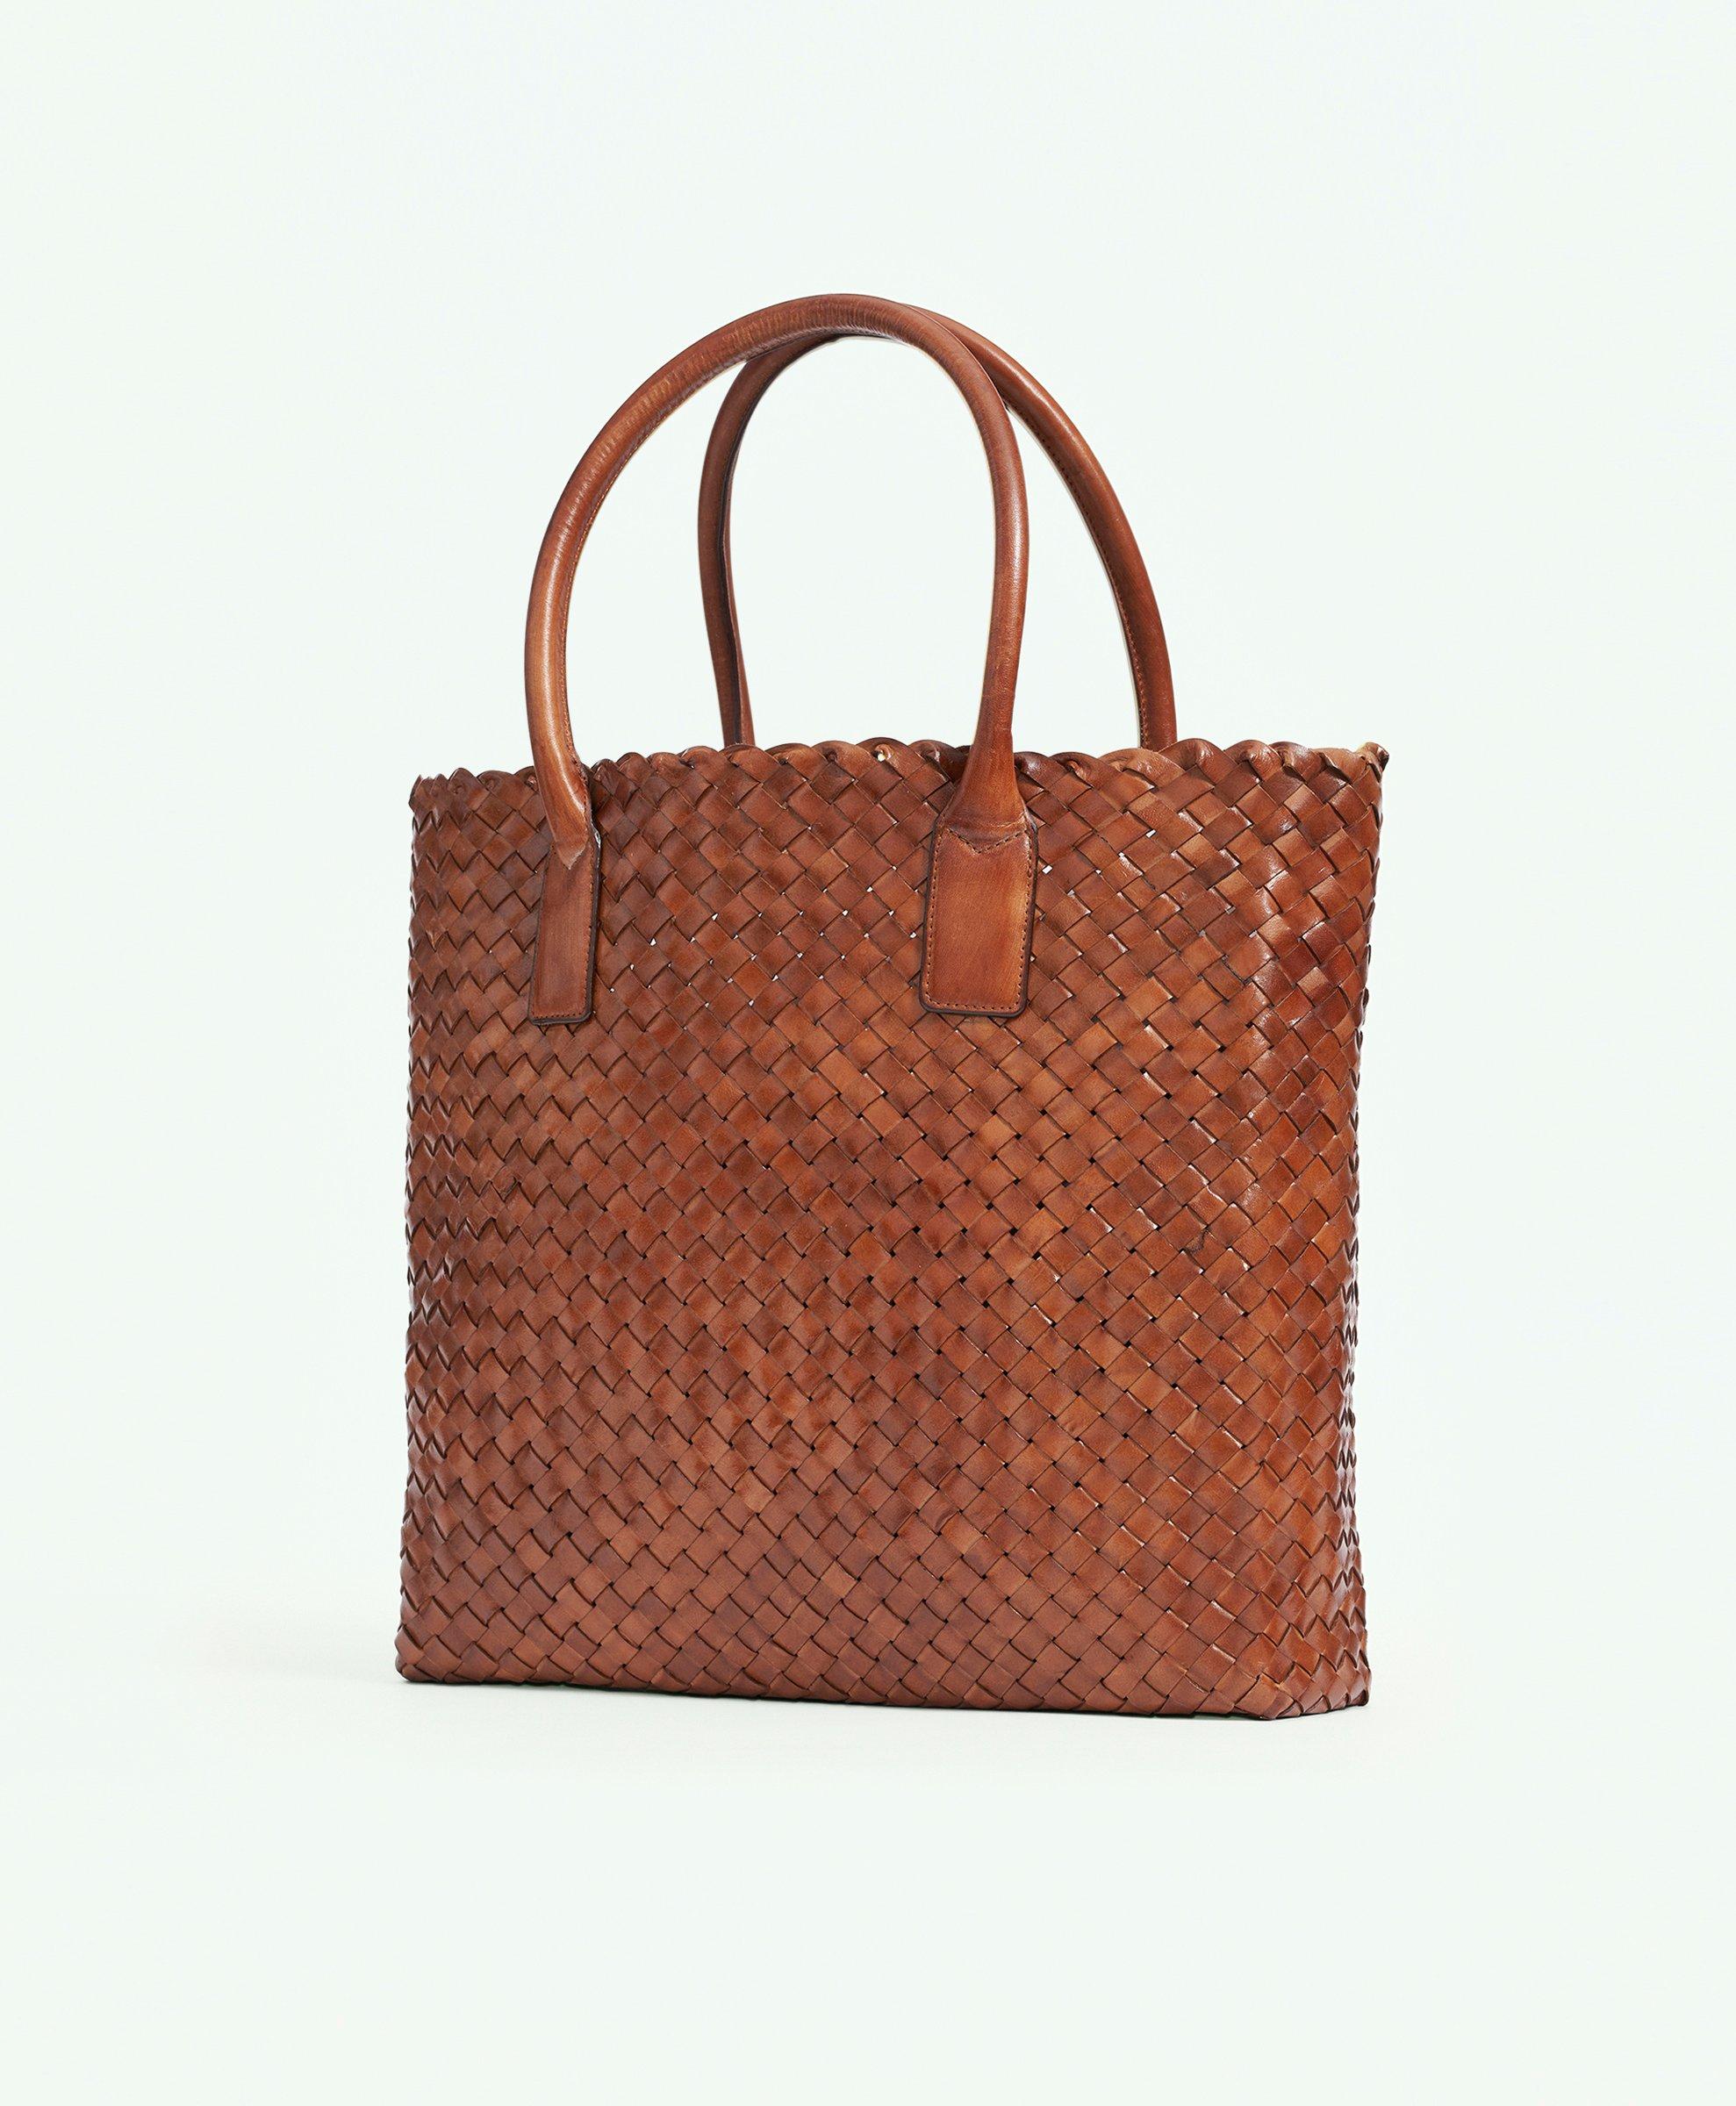 Brooks Brothers Woven Leather Tote Bag | Cognac